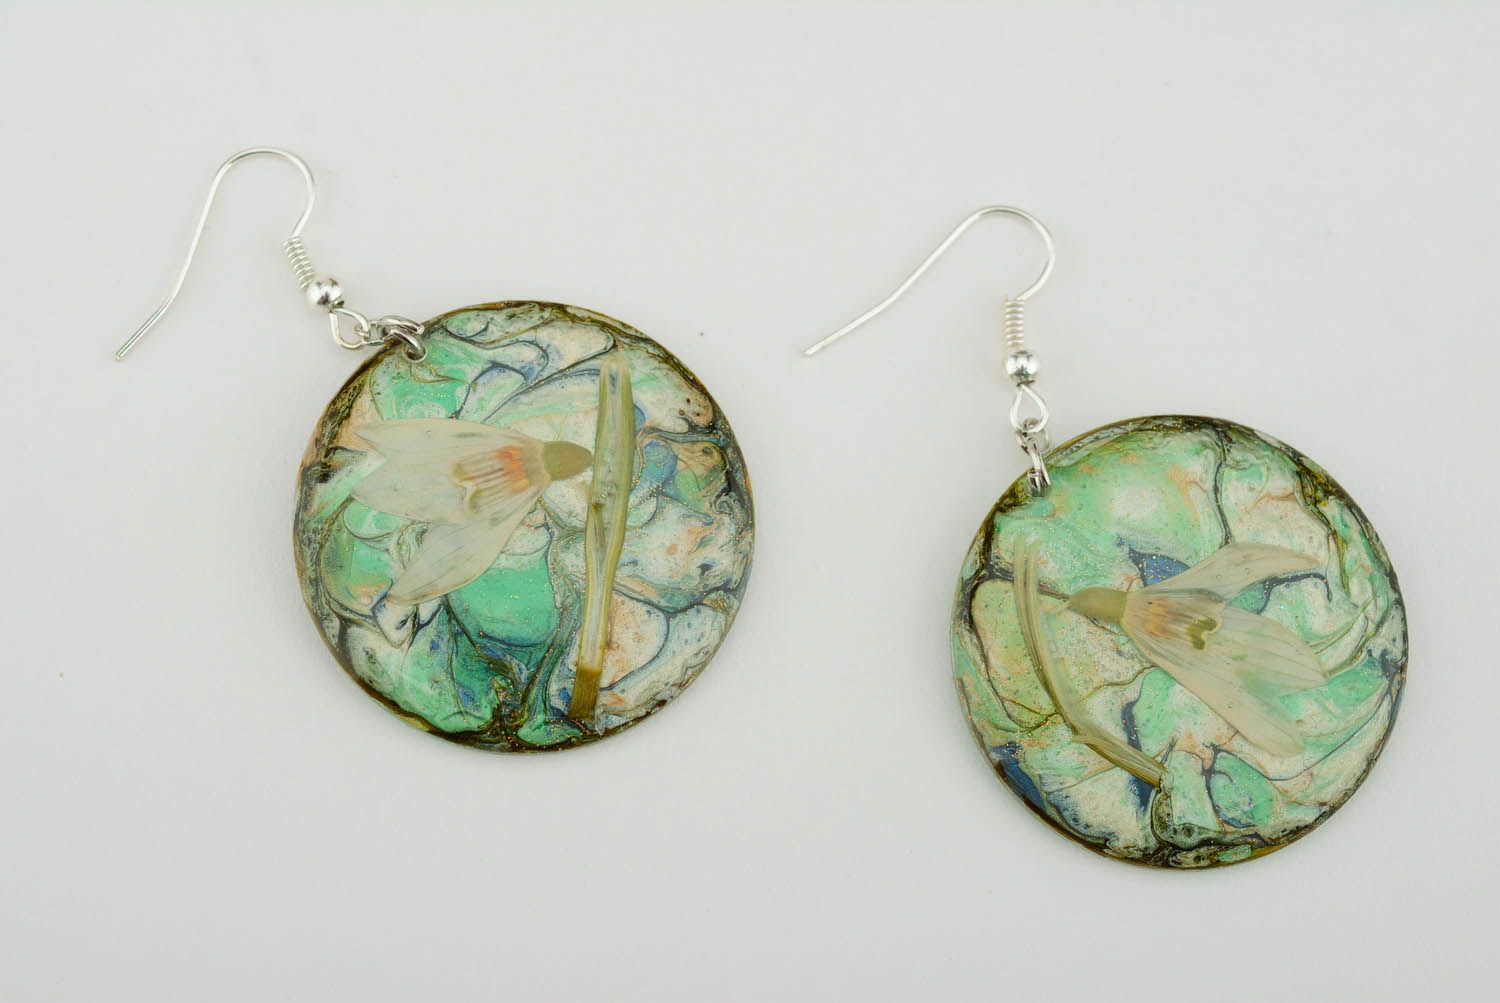 Earrings with dry flowers photo 5